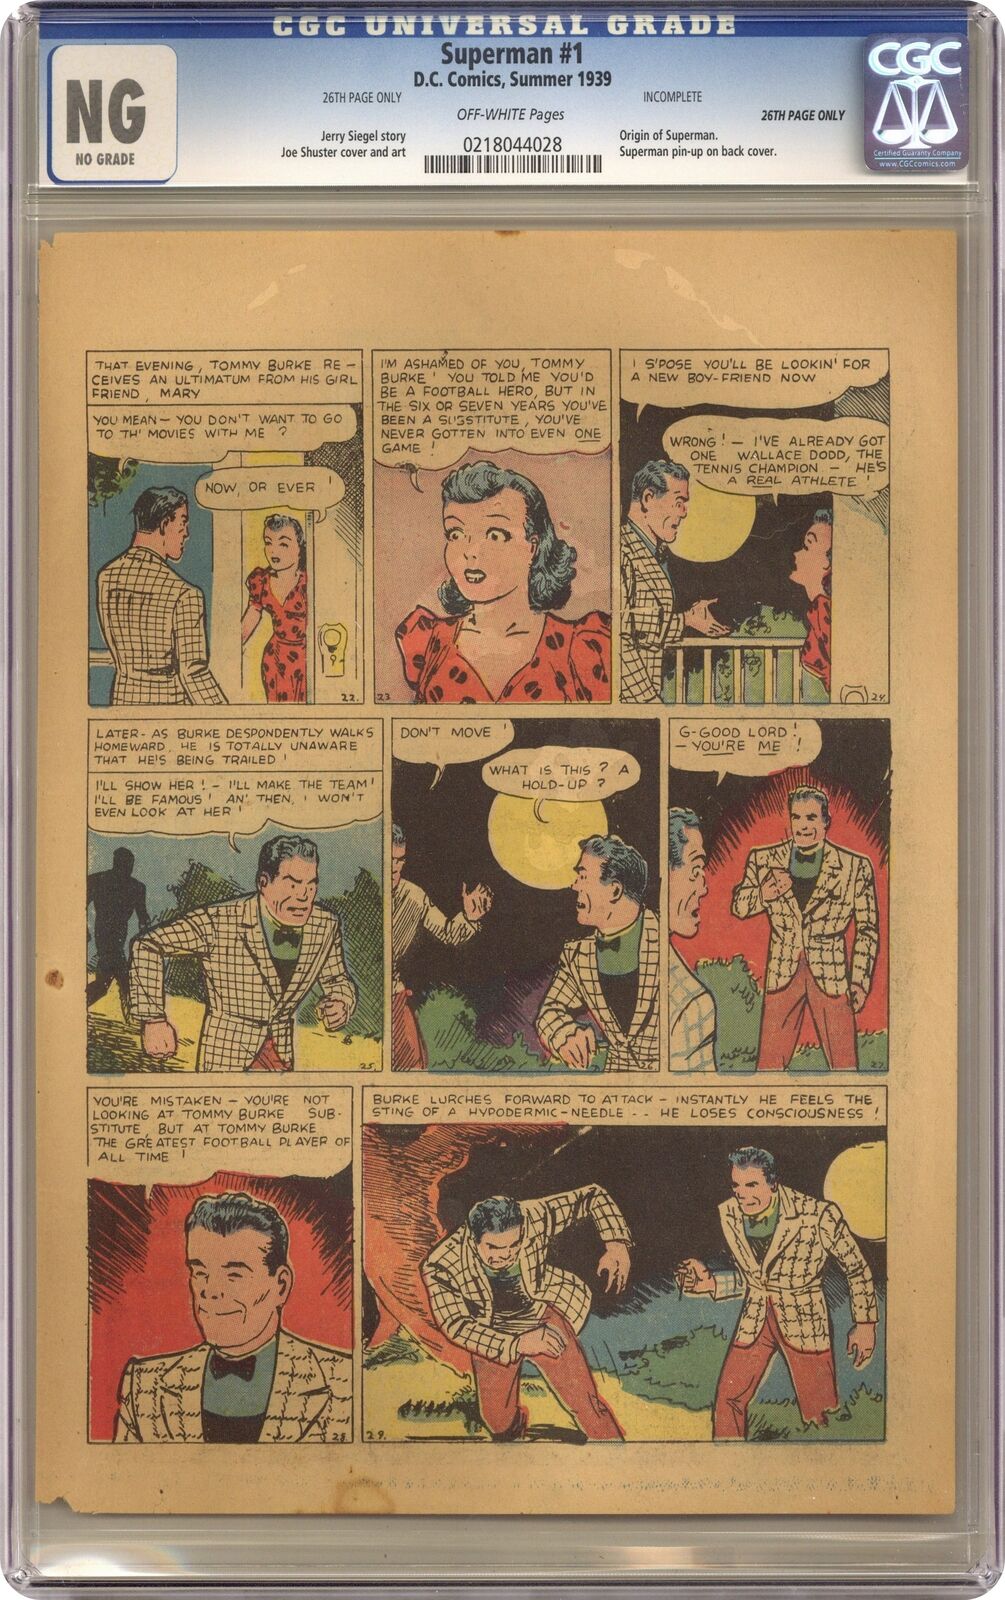 Superman (1939 1st Series) 1 CGC 26th Page Only 0218044028